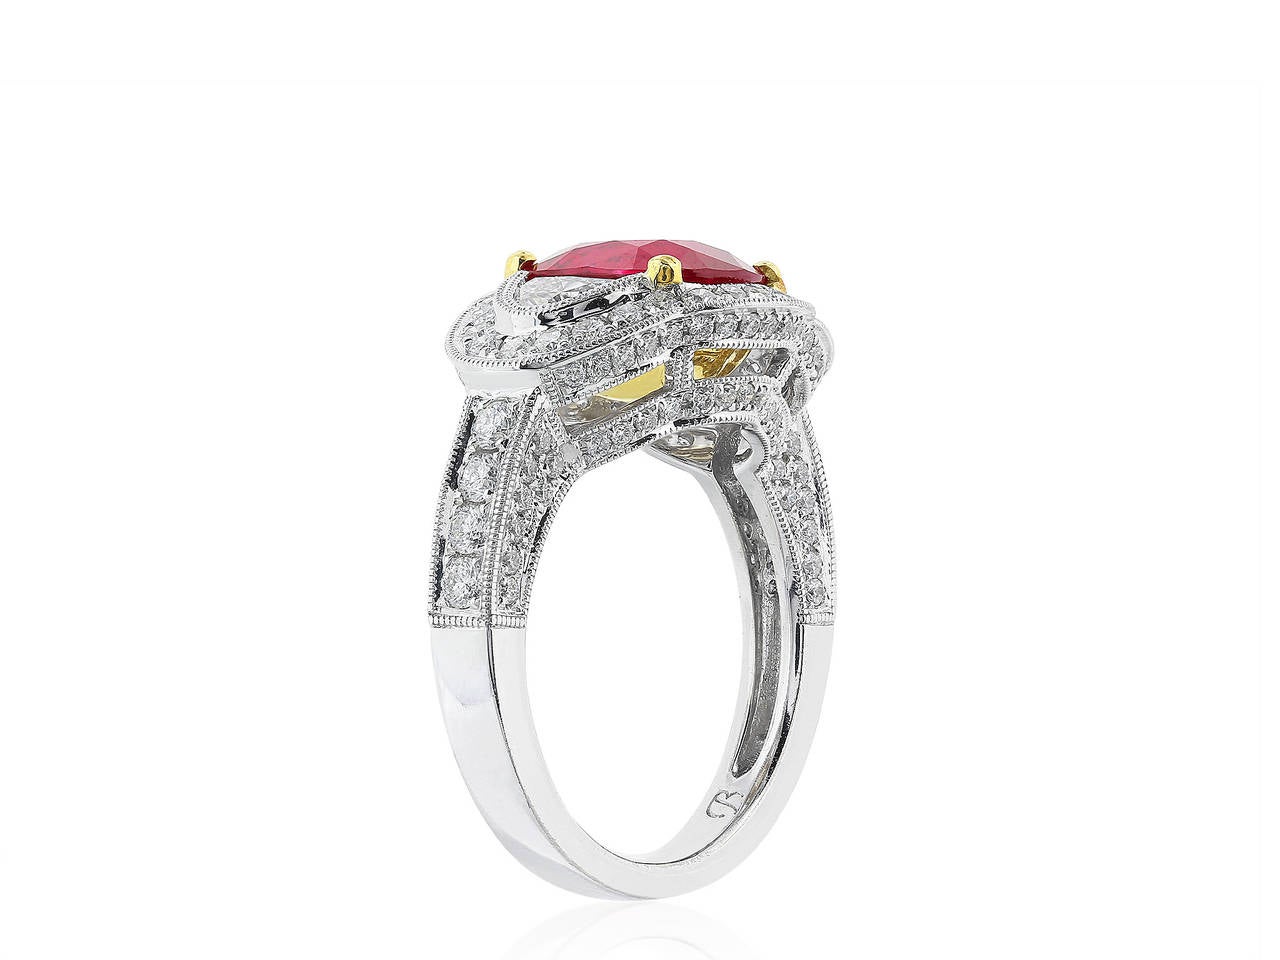 18 karat white gold 3 stone ring consisting of 1 cushion shape ruby weighing 2.55 carats, with AGL certificate, the center stone is flanked by 2 brilliant cut half moons having a total weight of 1.00 carats, the 3 stone stones are set with additinal